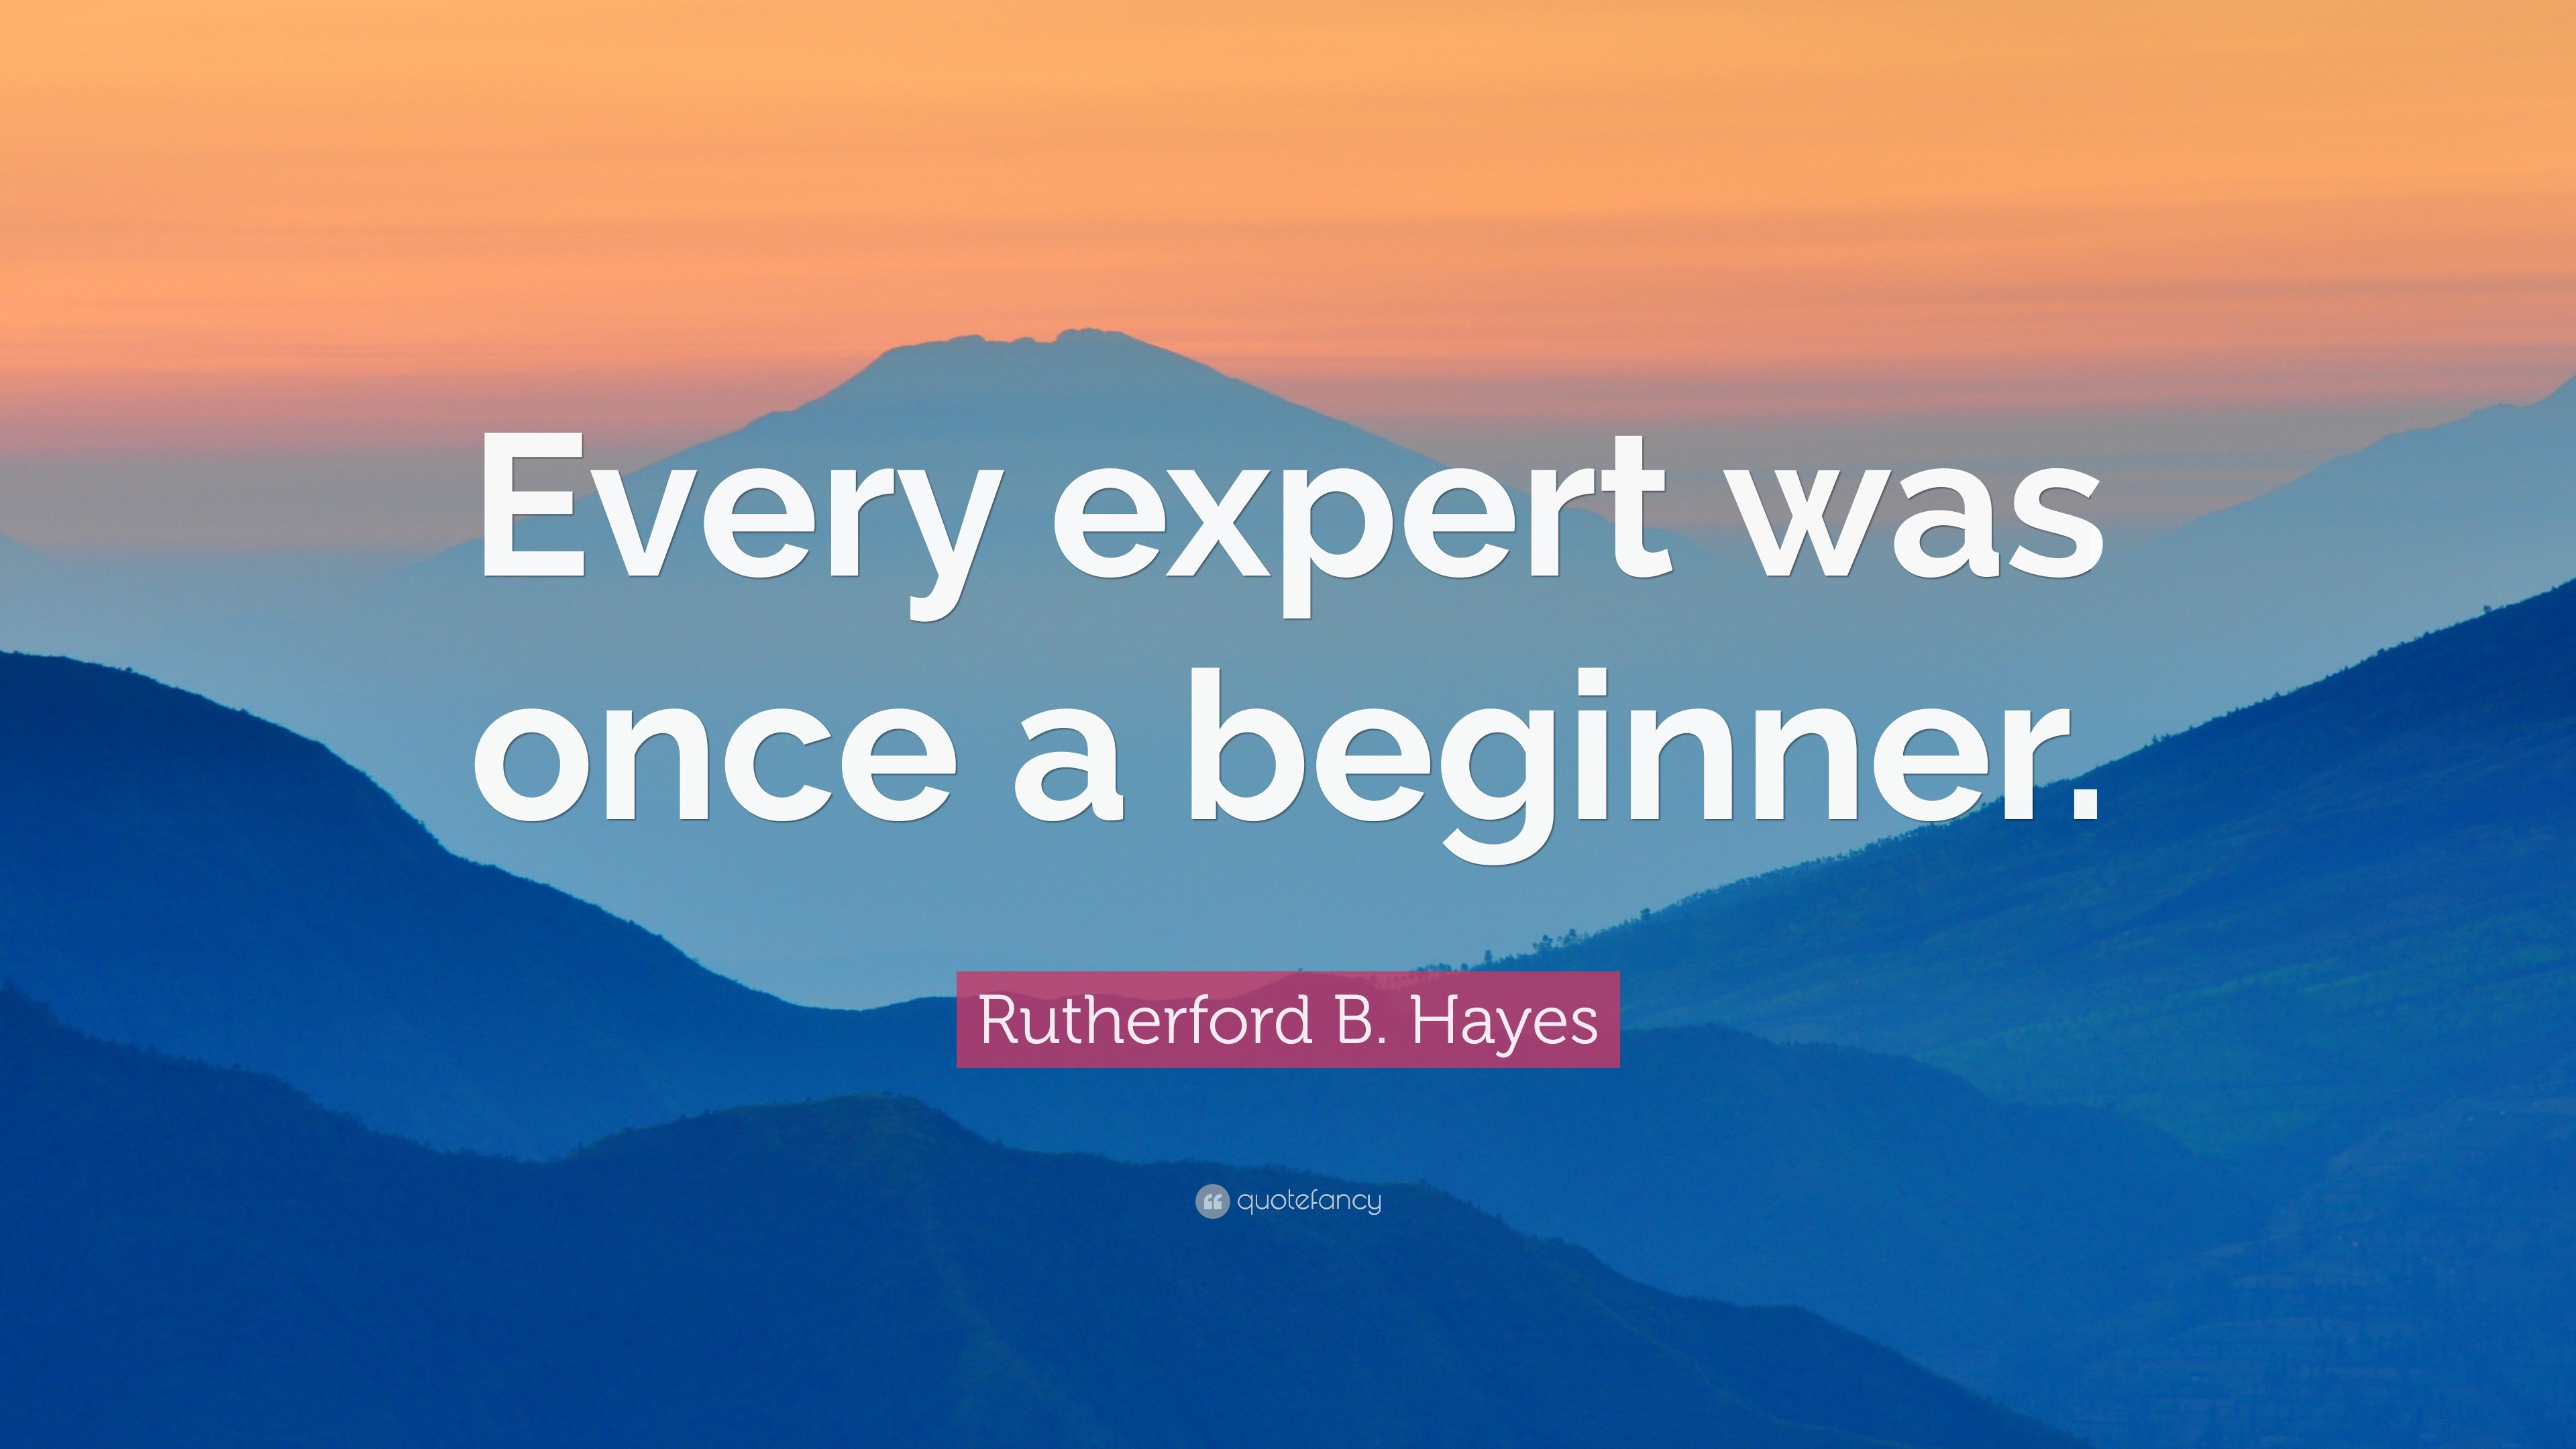 Rutherford B. Hayes Quote: “Every expert was once a beginner.”